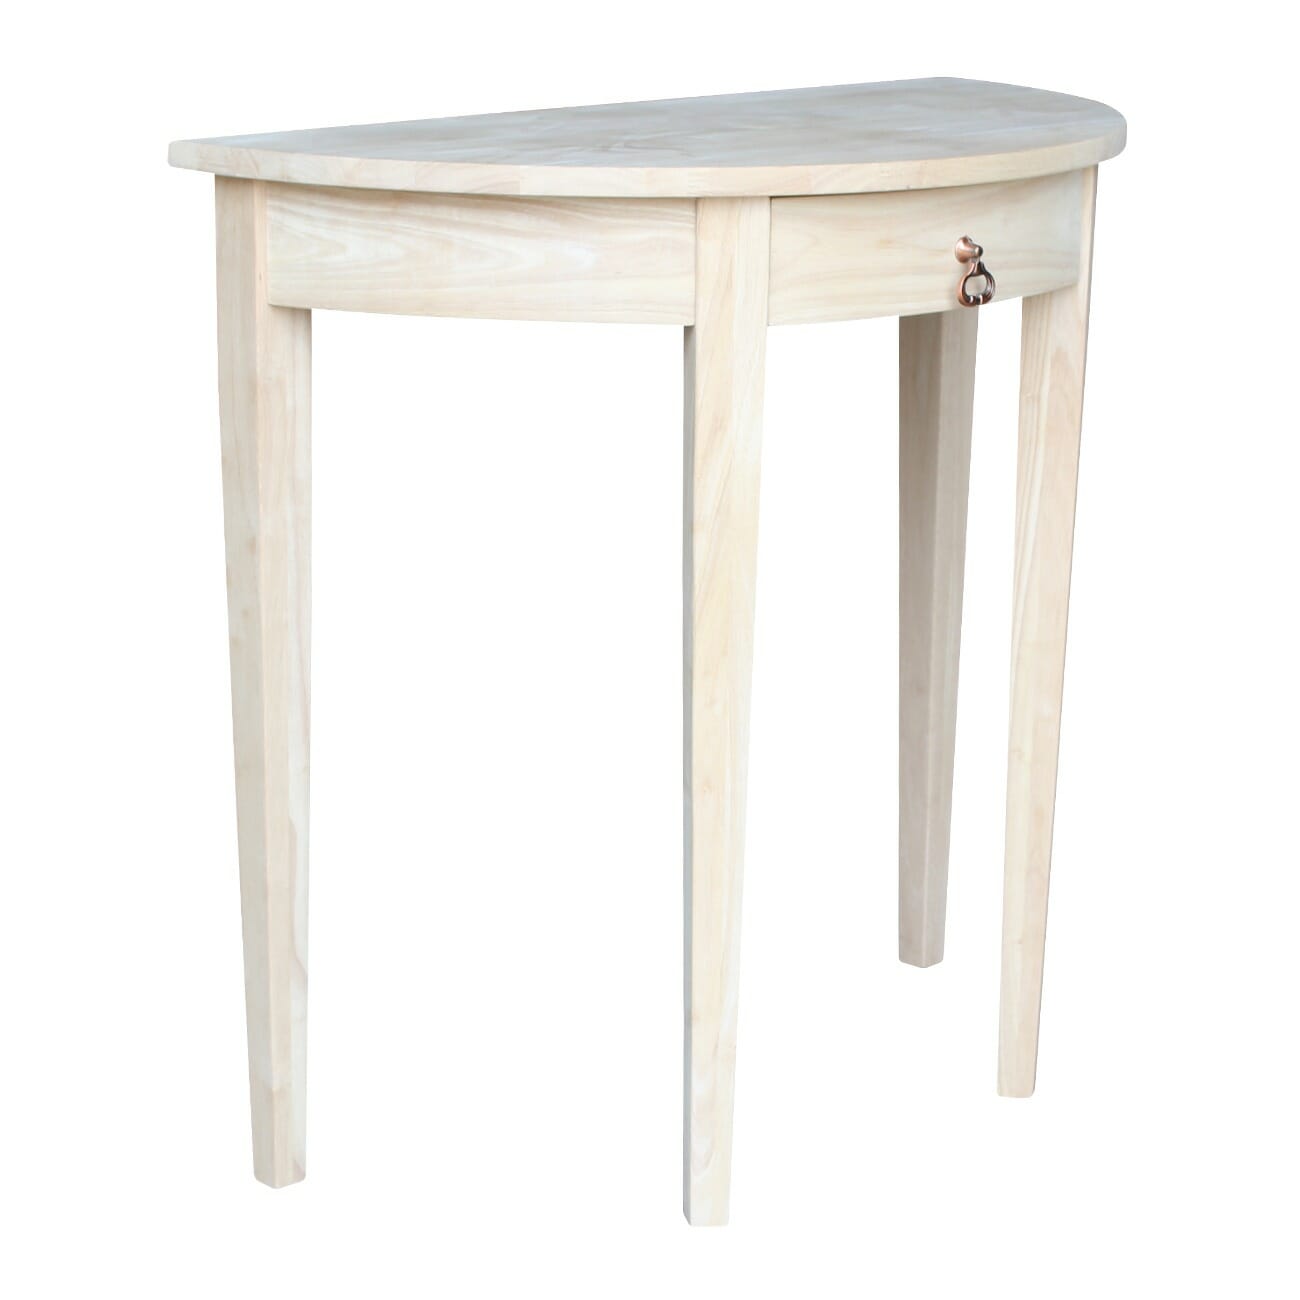 Ot 3216h Half Round Entry Table, Half Circle Entry Table